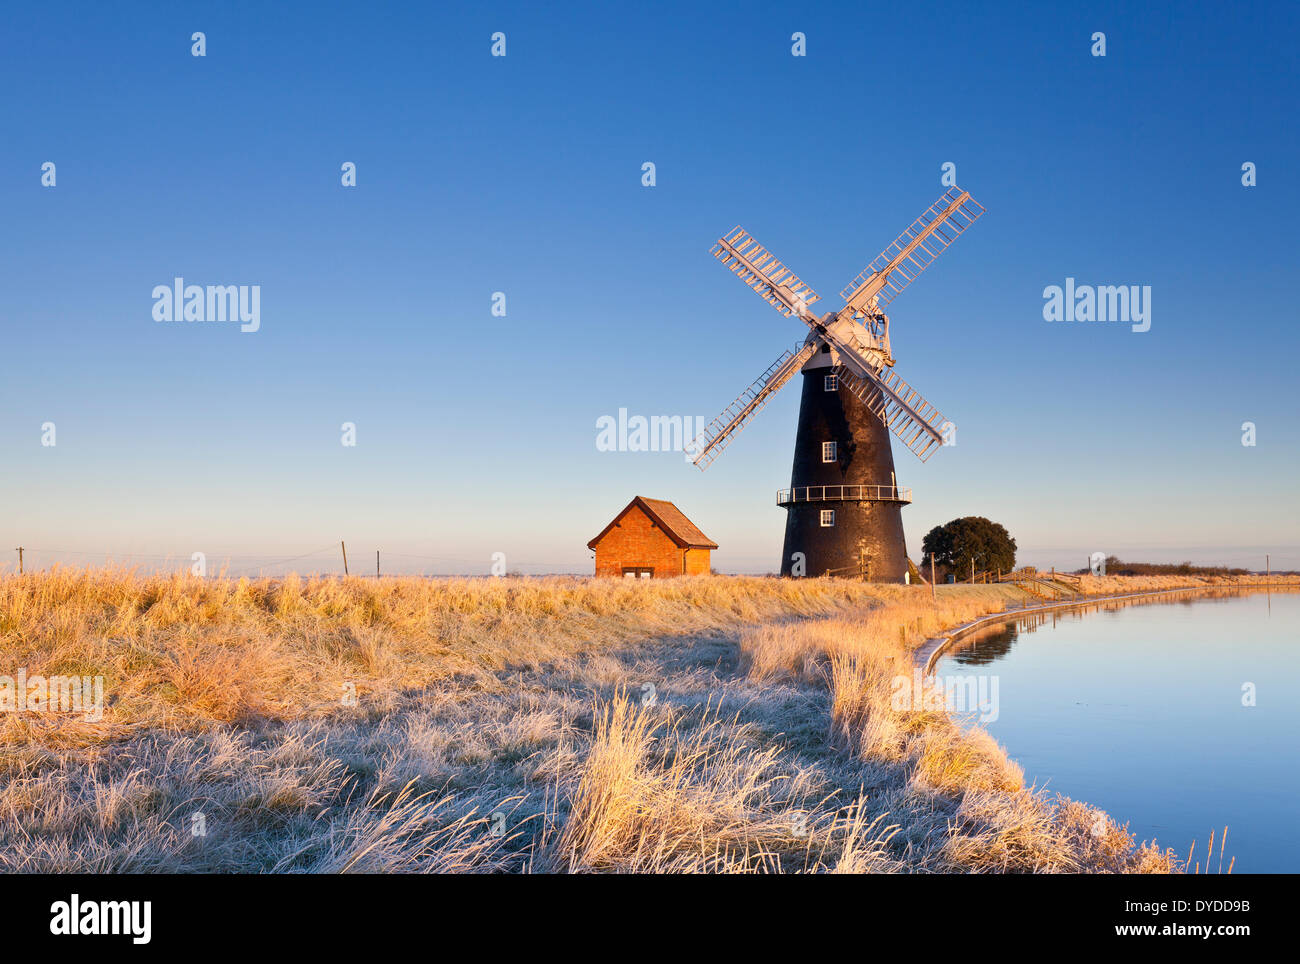 The remote Halvergate Marshes on the Norfolk Broads. Stock Photo